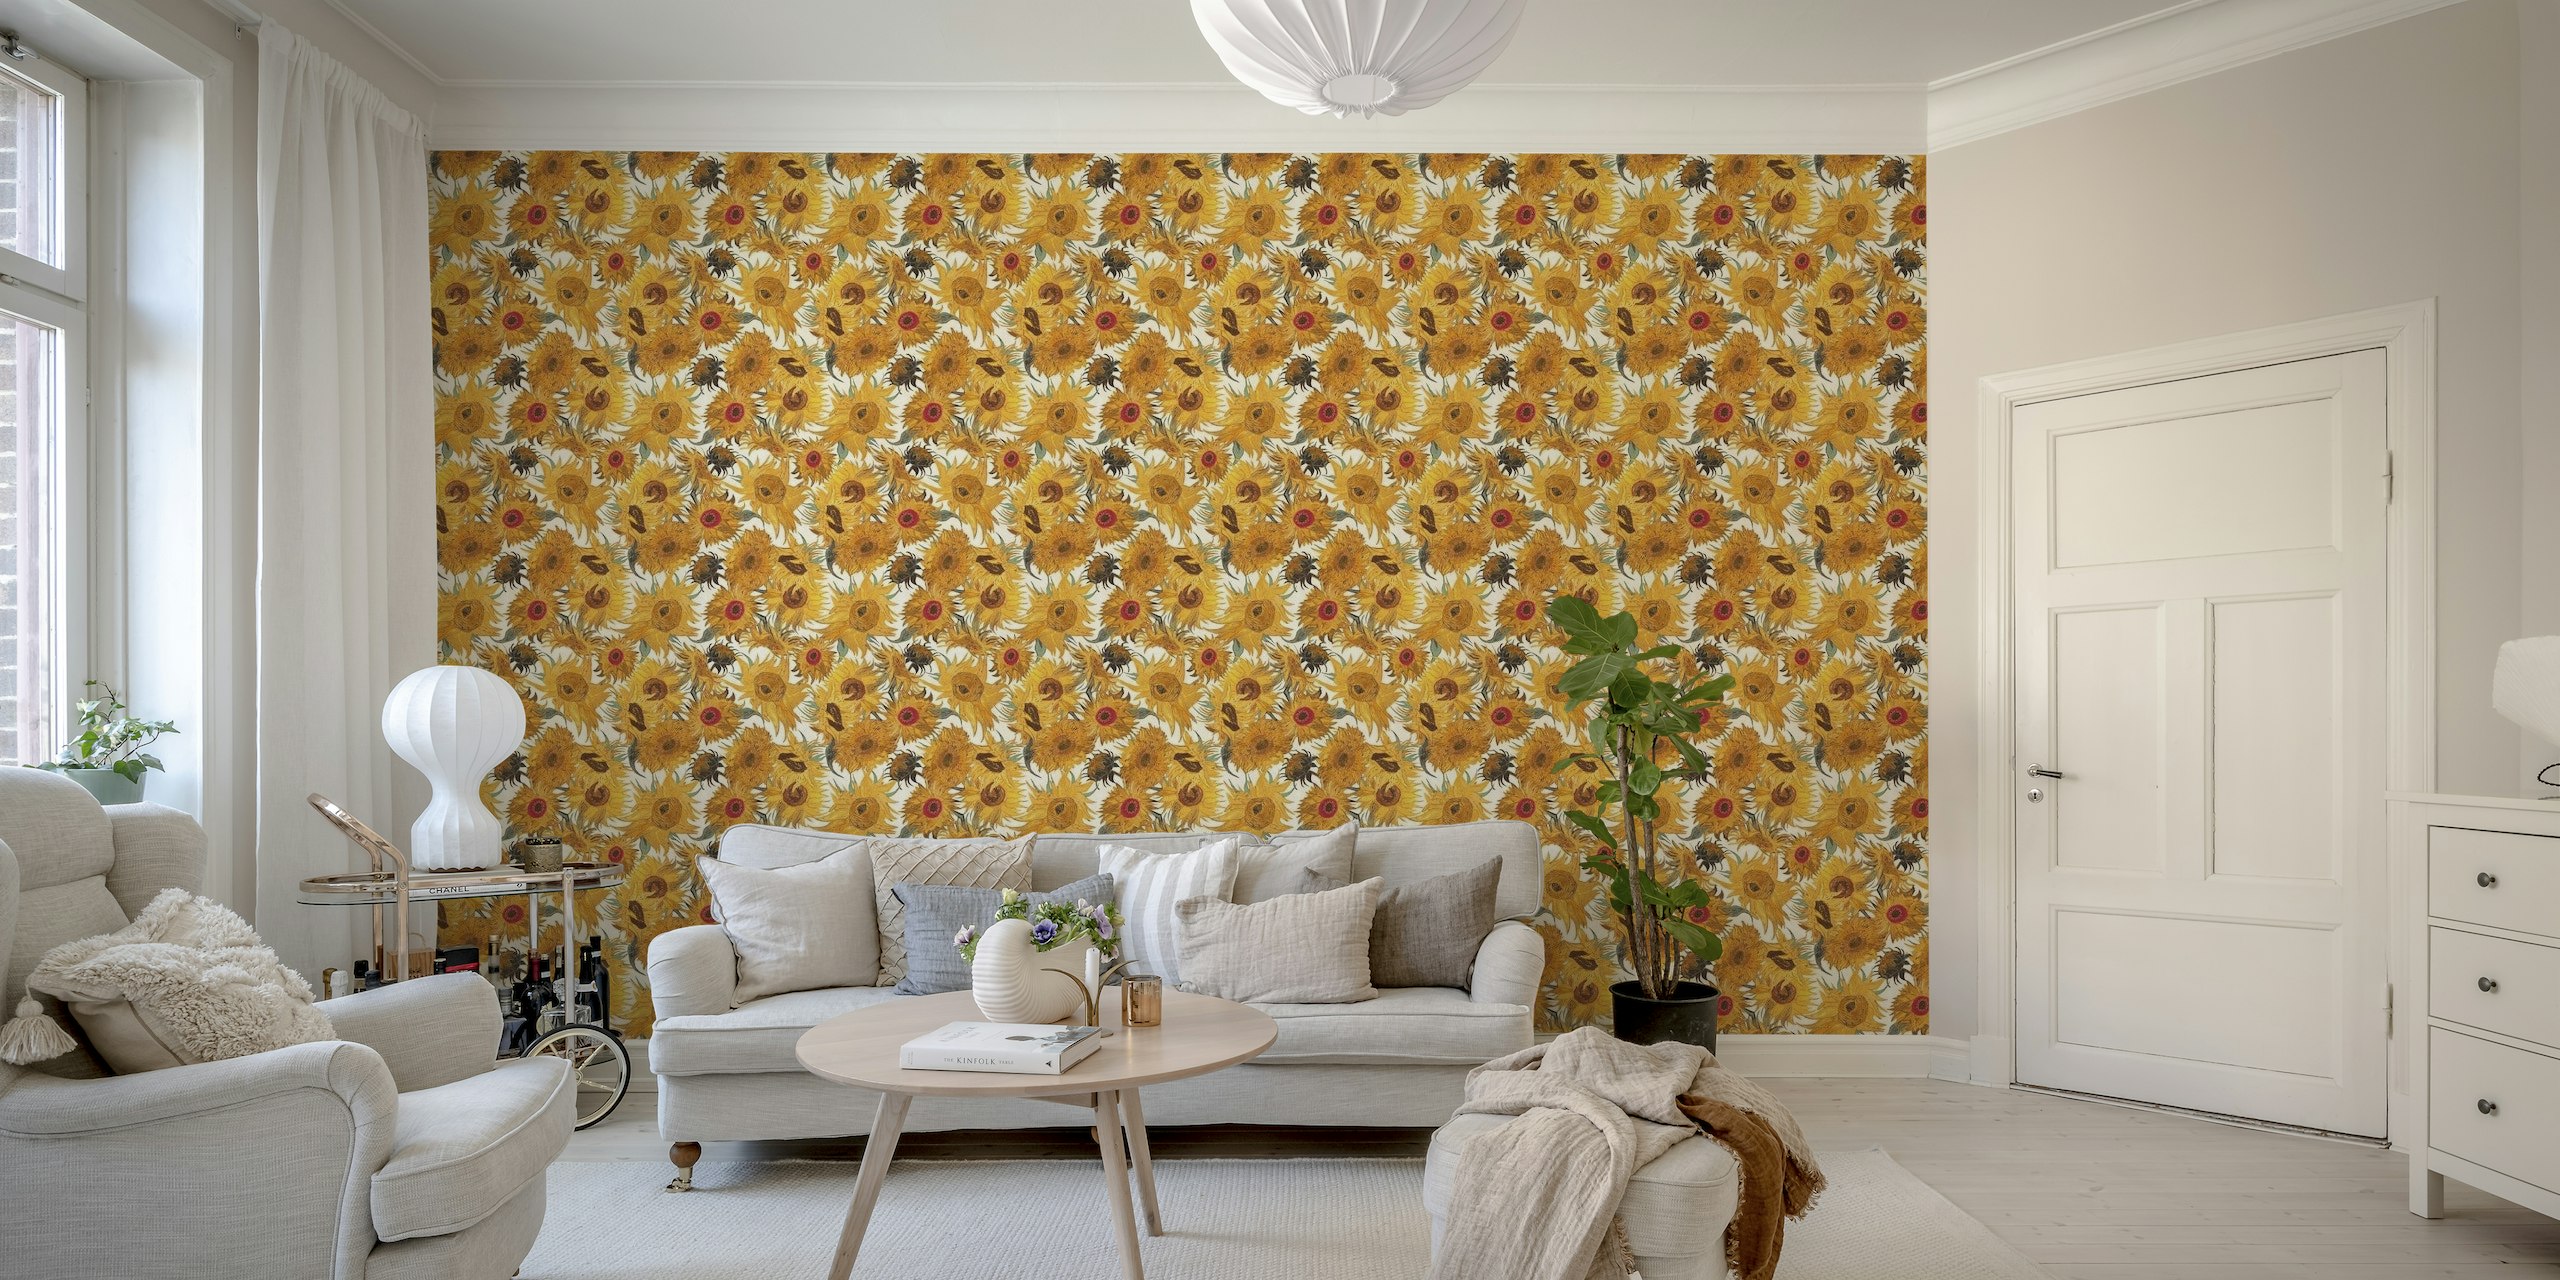 Van Gogh Sunflowers Pattern wall mural with cream, yellow, sage green, rust, and brown colors